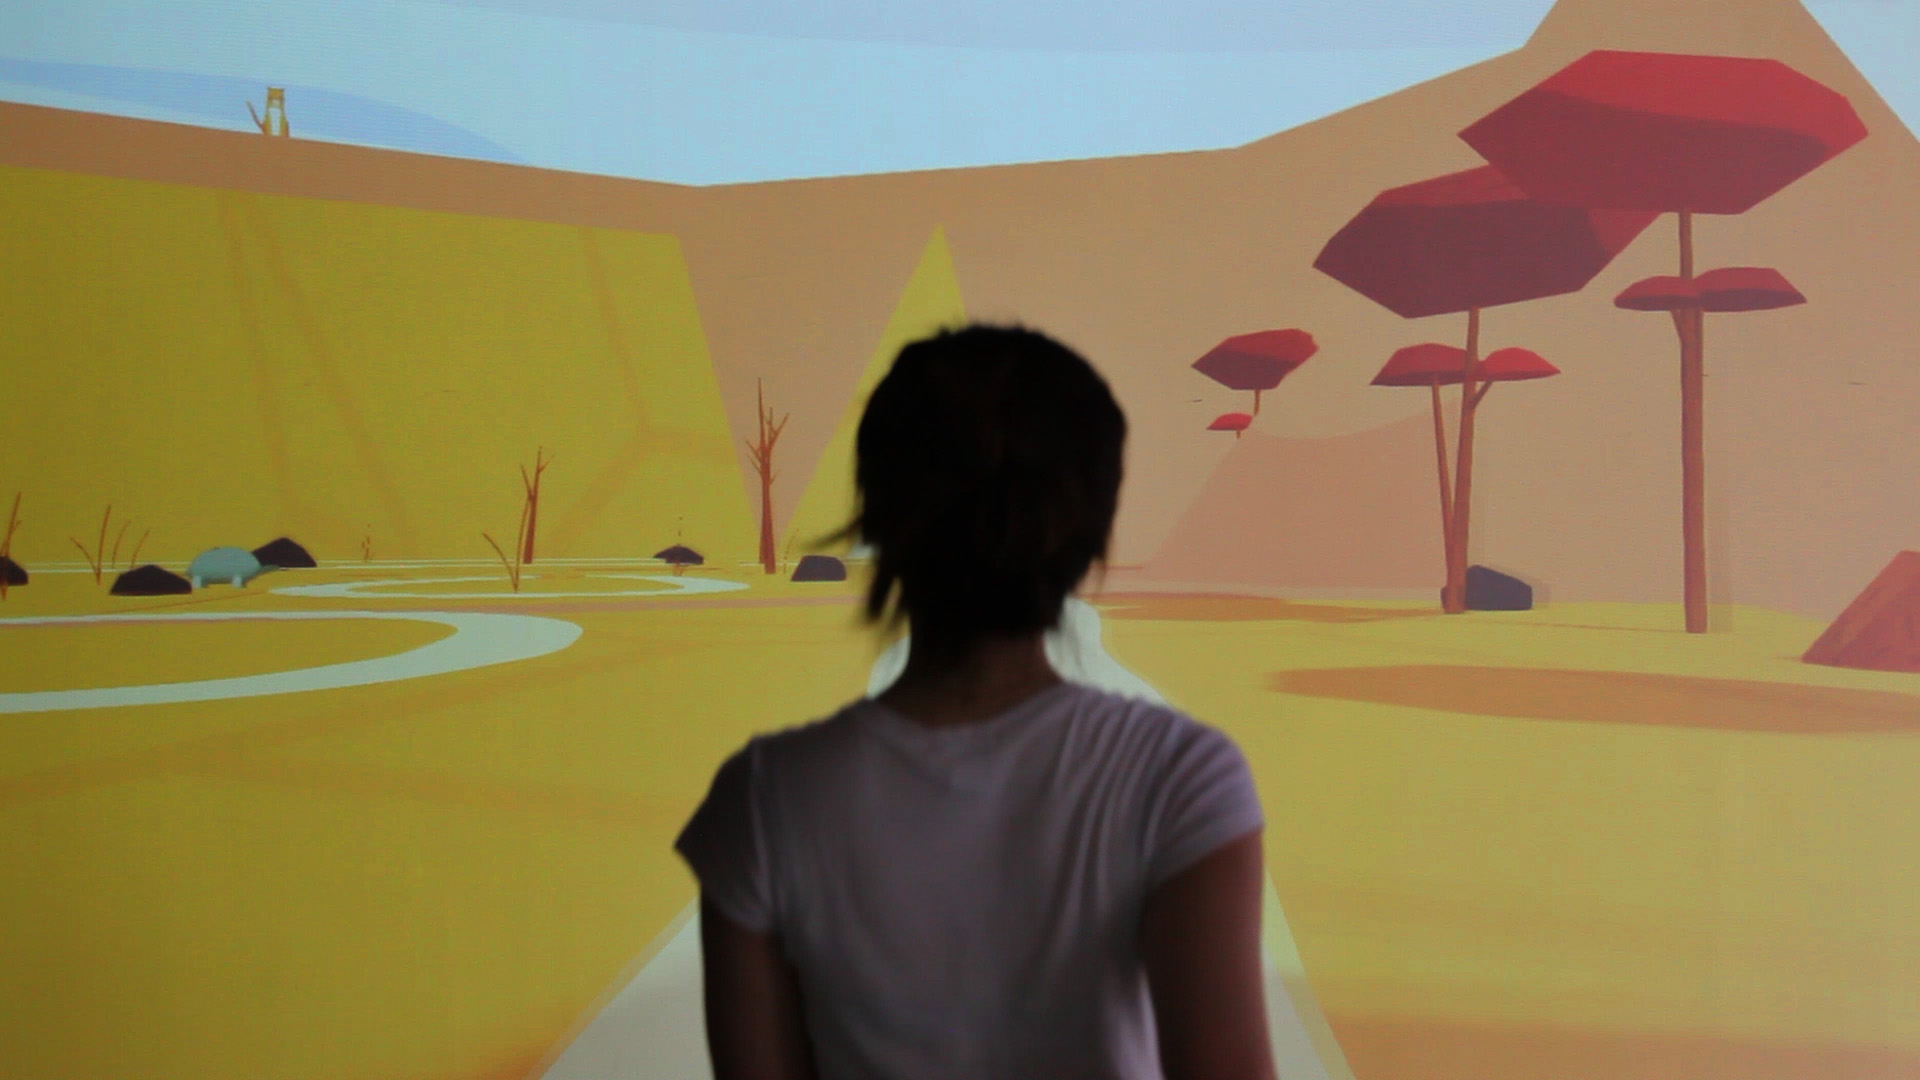 Run through a computer generated landscape in this experiential art installation